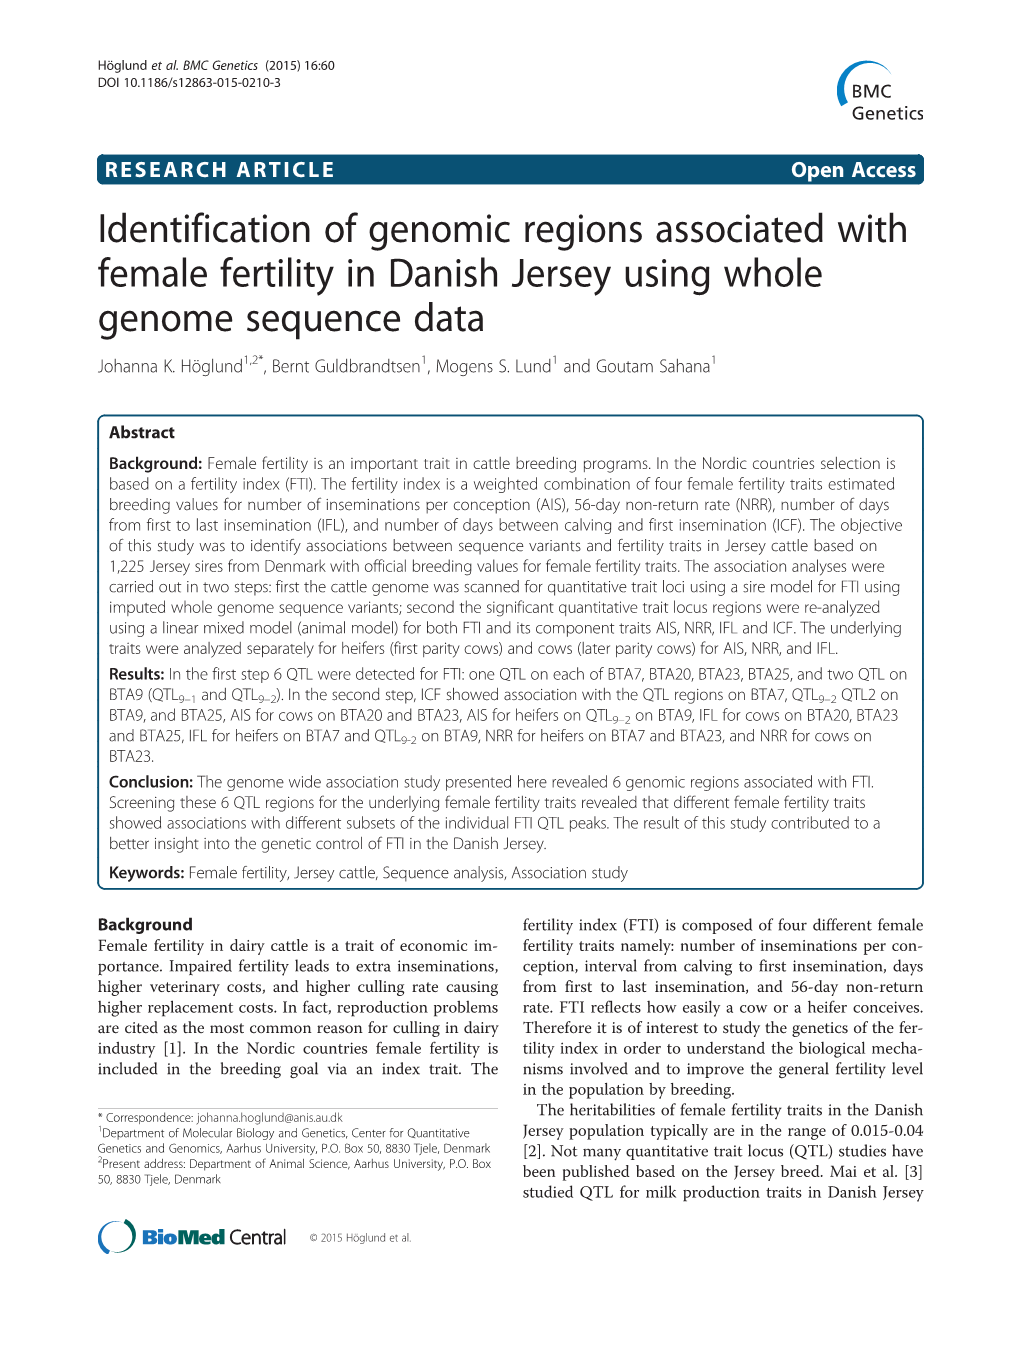 Identification of Genomic Regions Associated with Female Fertility in Danish Jersey Using Whole Genome Sequence Data Johanna K